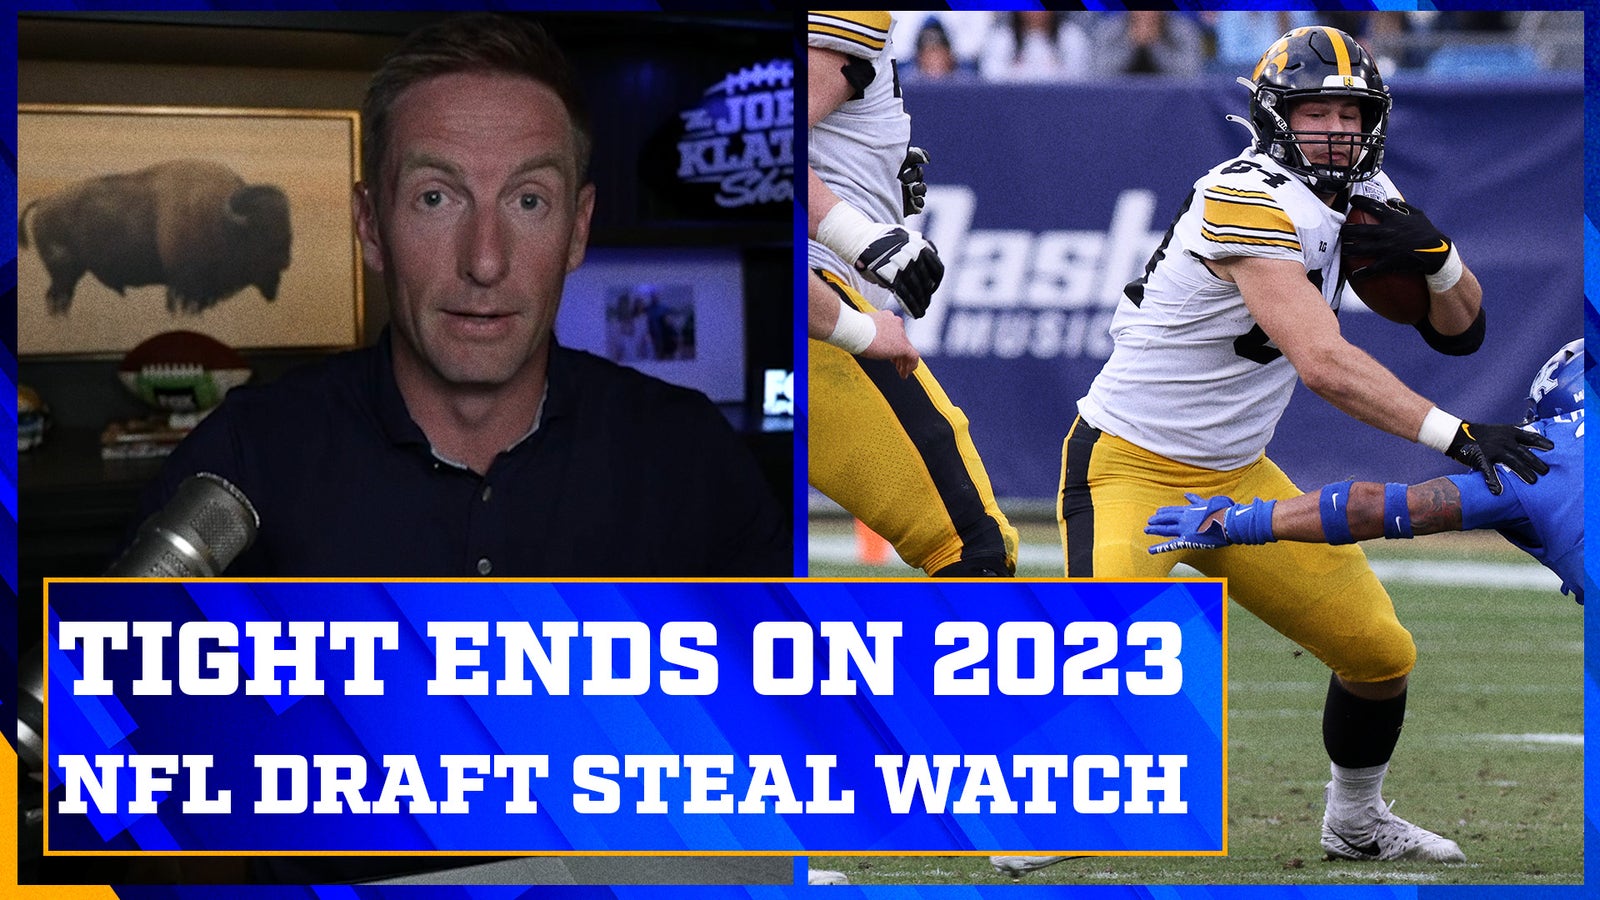 Sam LaPorta and more tight ends on 2023 NFL Draft steal watch